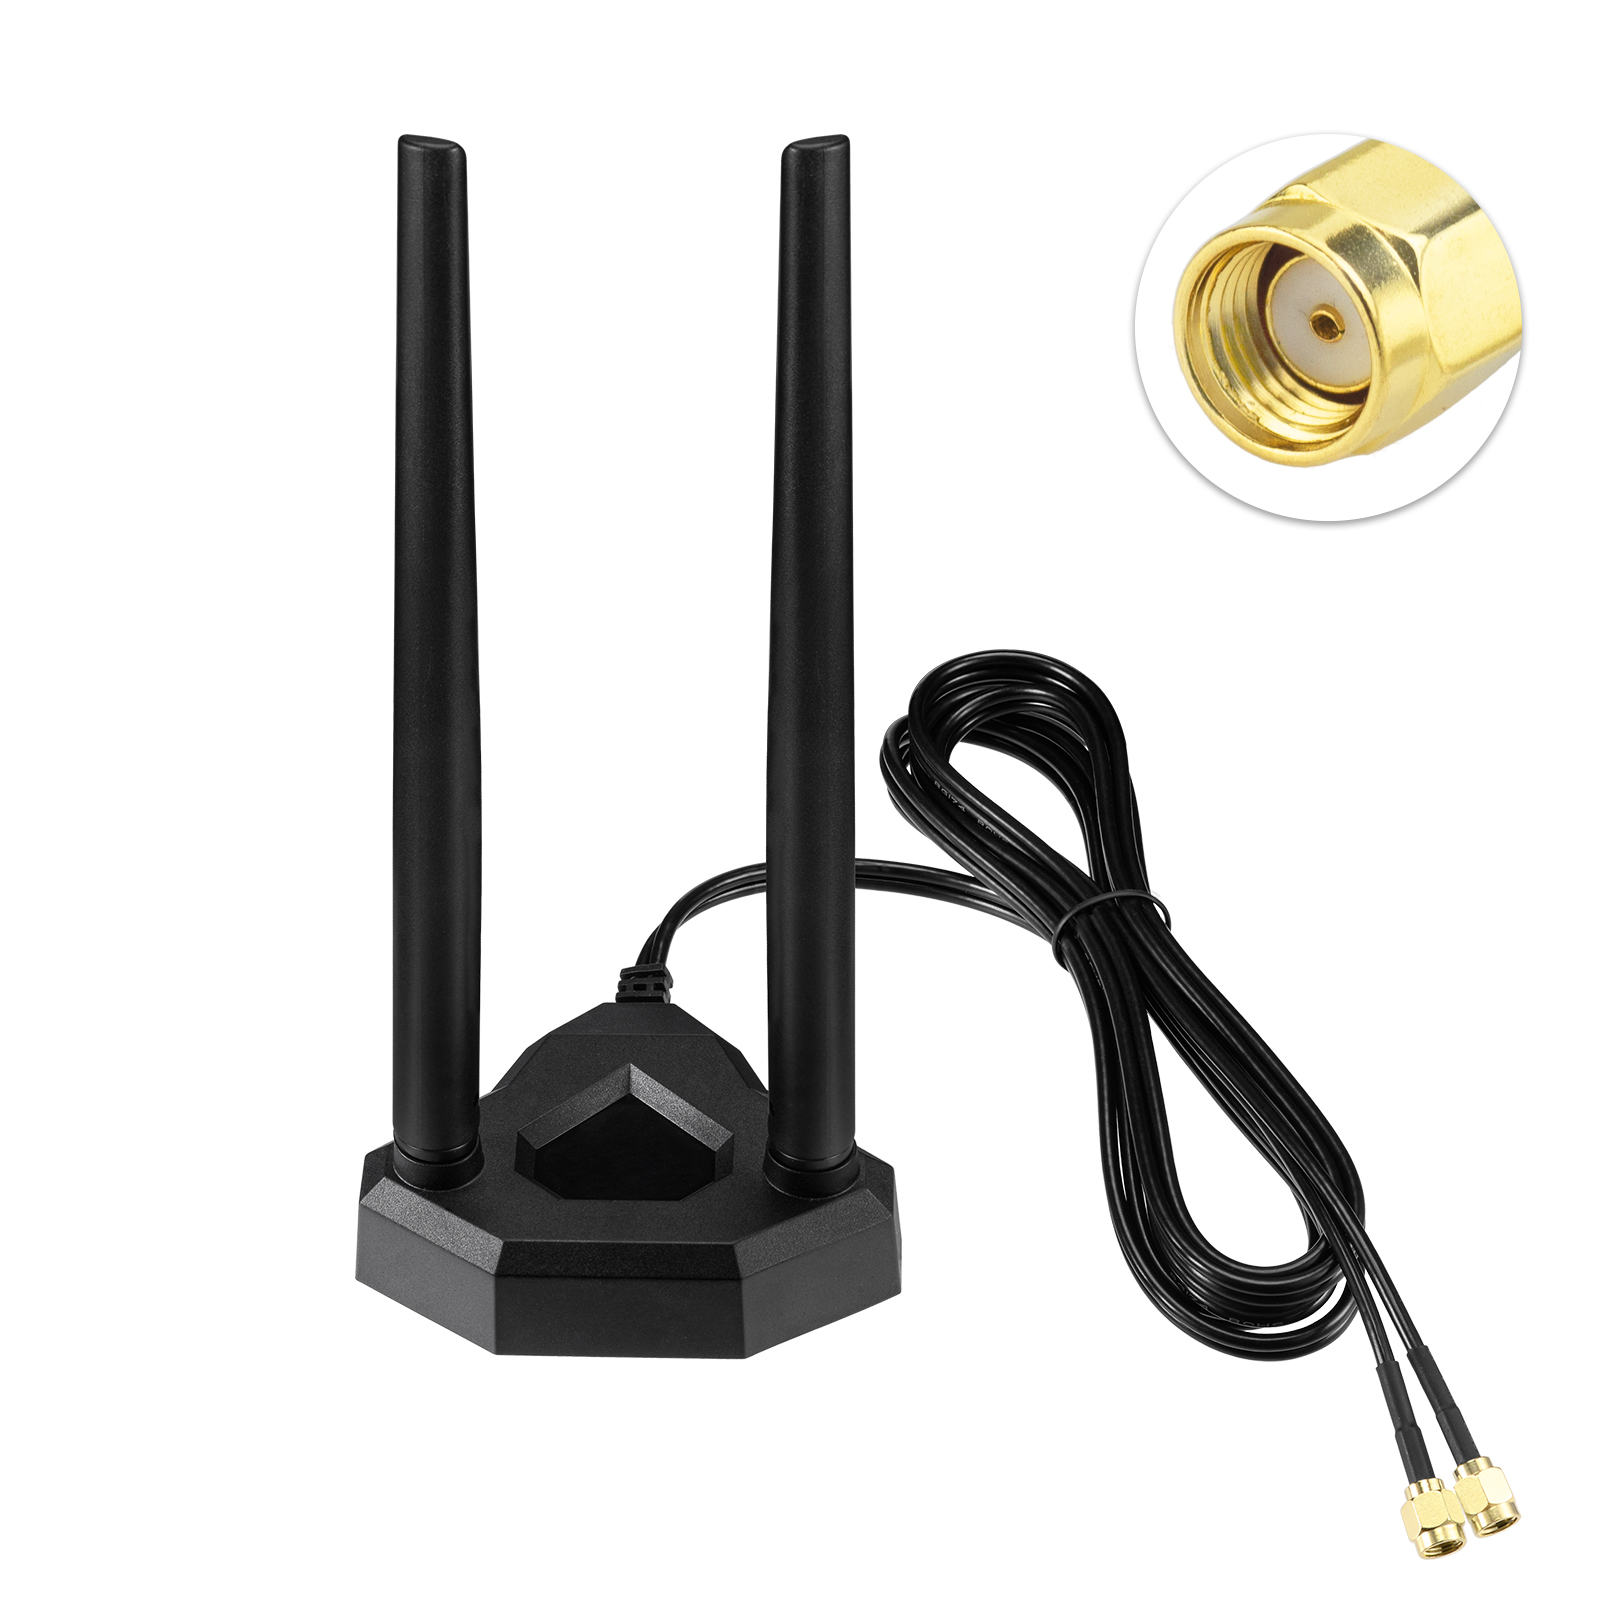 10  Replacement 6dBi WiFi Dual Band RP-SMA Antenna for Cisco Linksys Router 